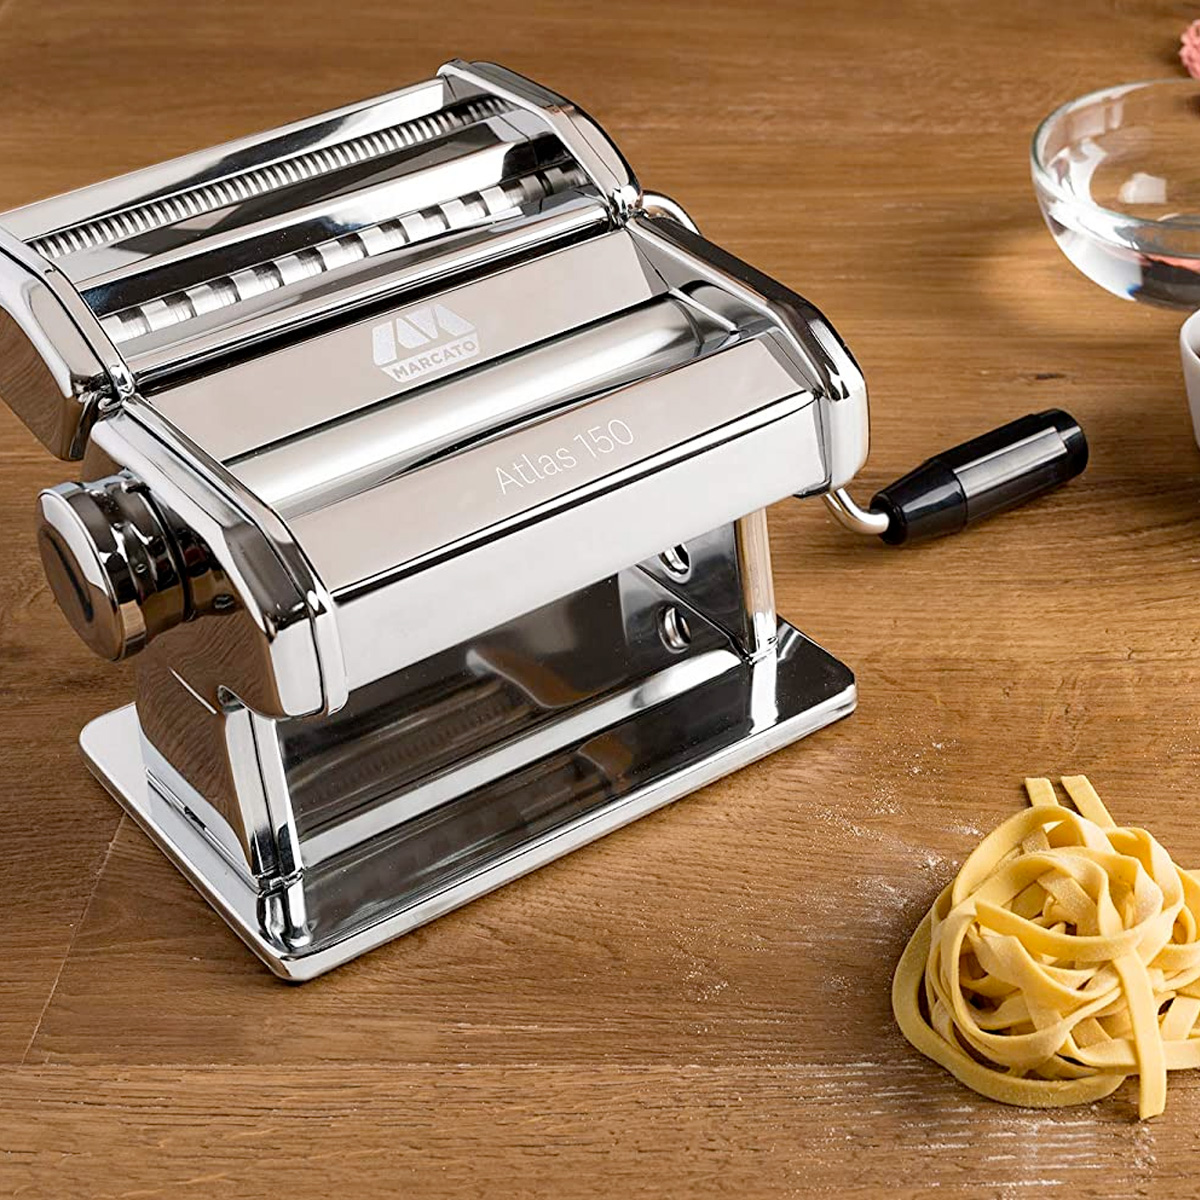 Marcato Atlas 150 Pasta Machine with some freshly made pasta in a lifestyle setting